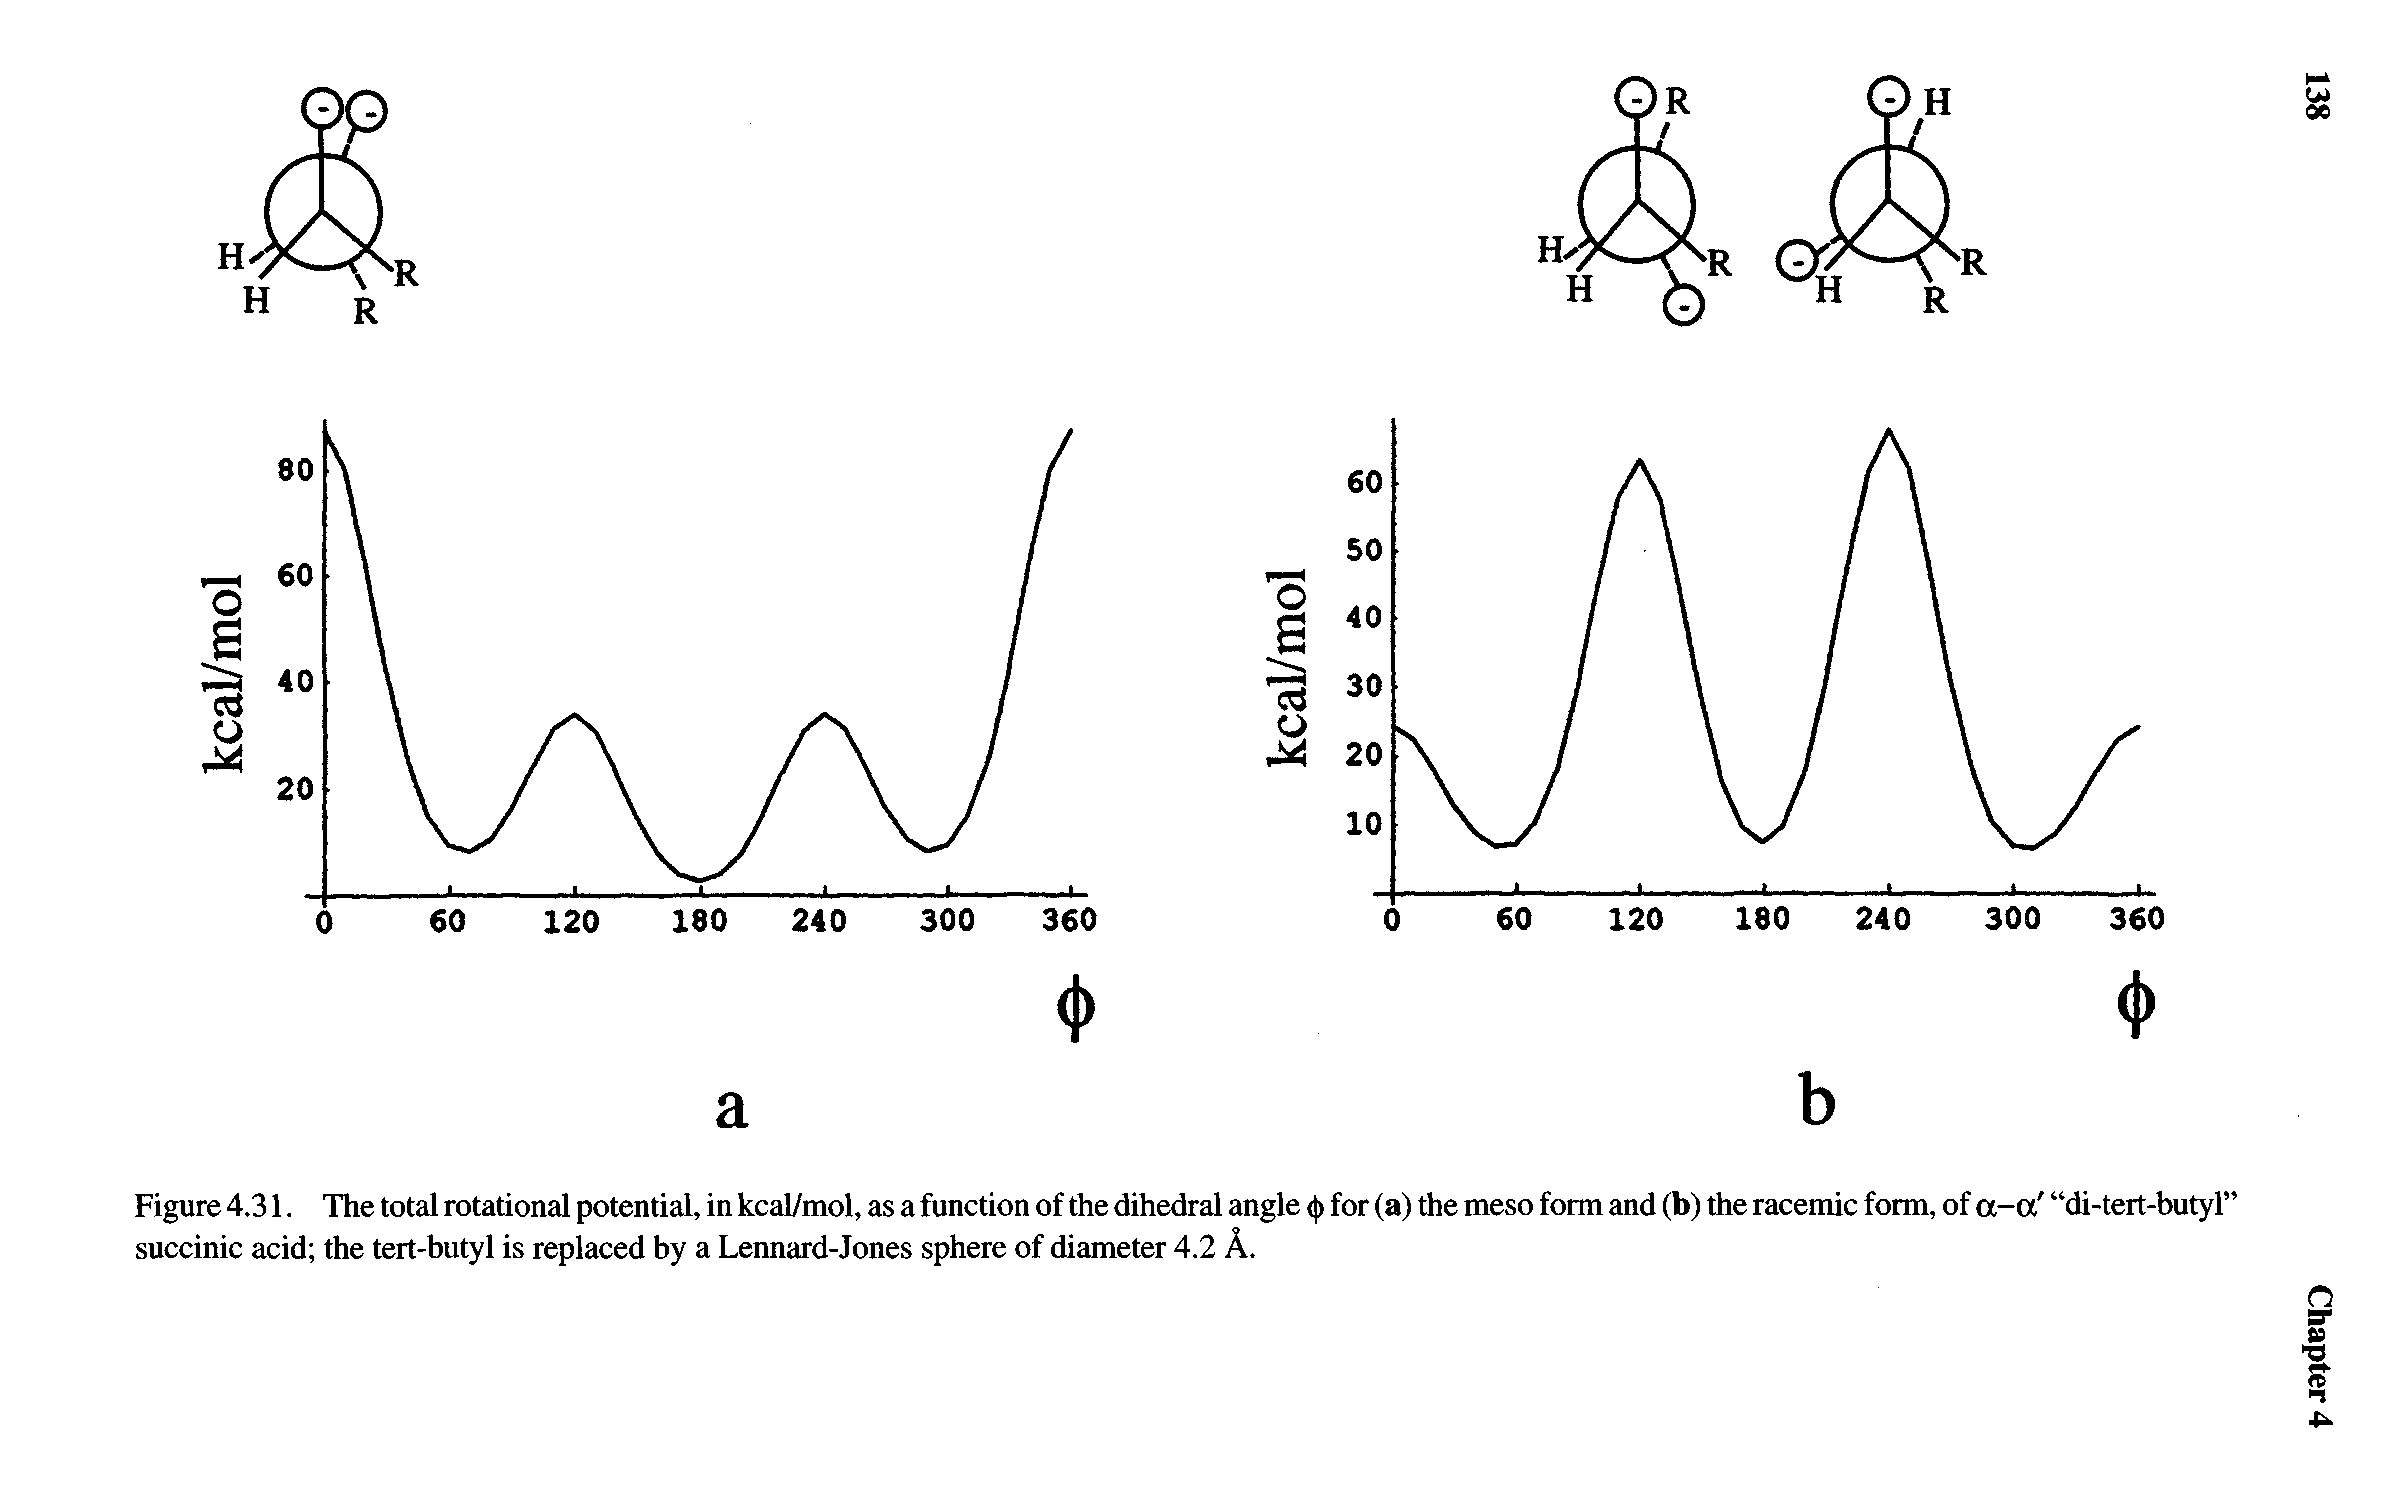 Figure 4.31. The total rotational potential, in kcal/mol, as a function of the dihedral angle <j) for (a) the meso form and (b) the racemic form, of a-a di-tert-butyl succinic acid the tert-hutyl is replaced by a Lennard-Jones sphere of diameter 4.2 A.